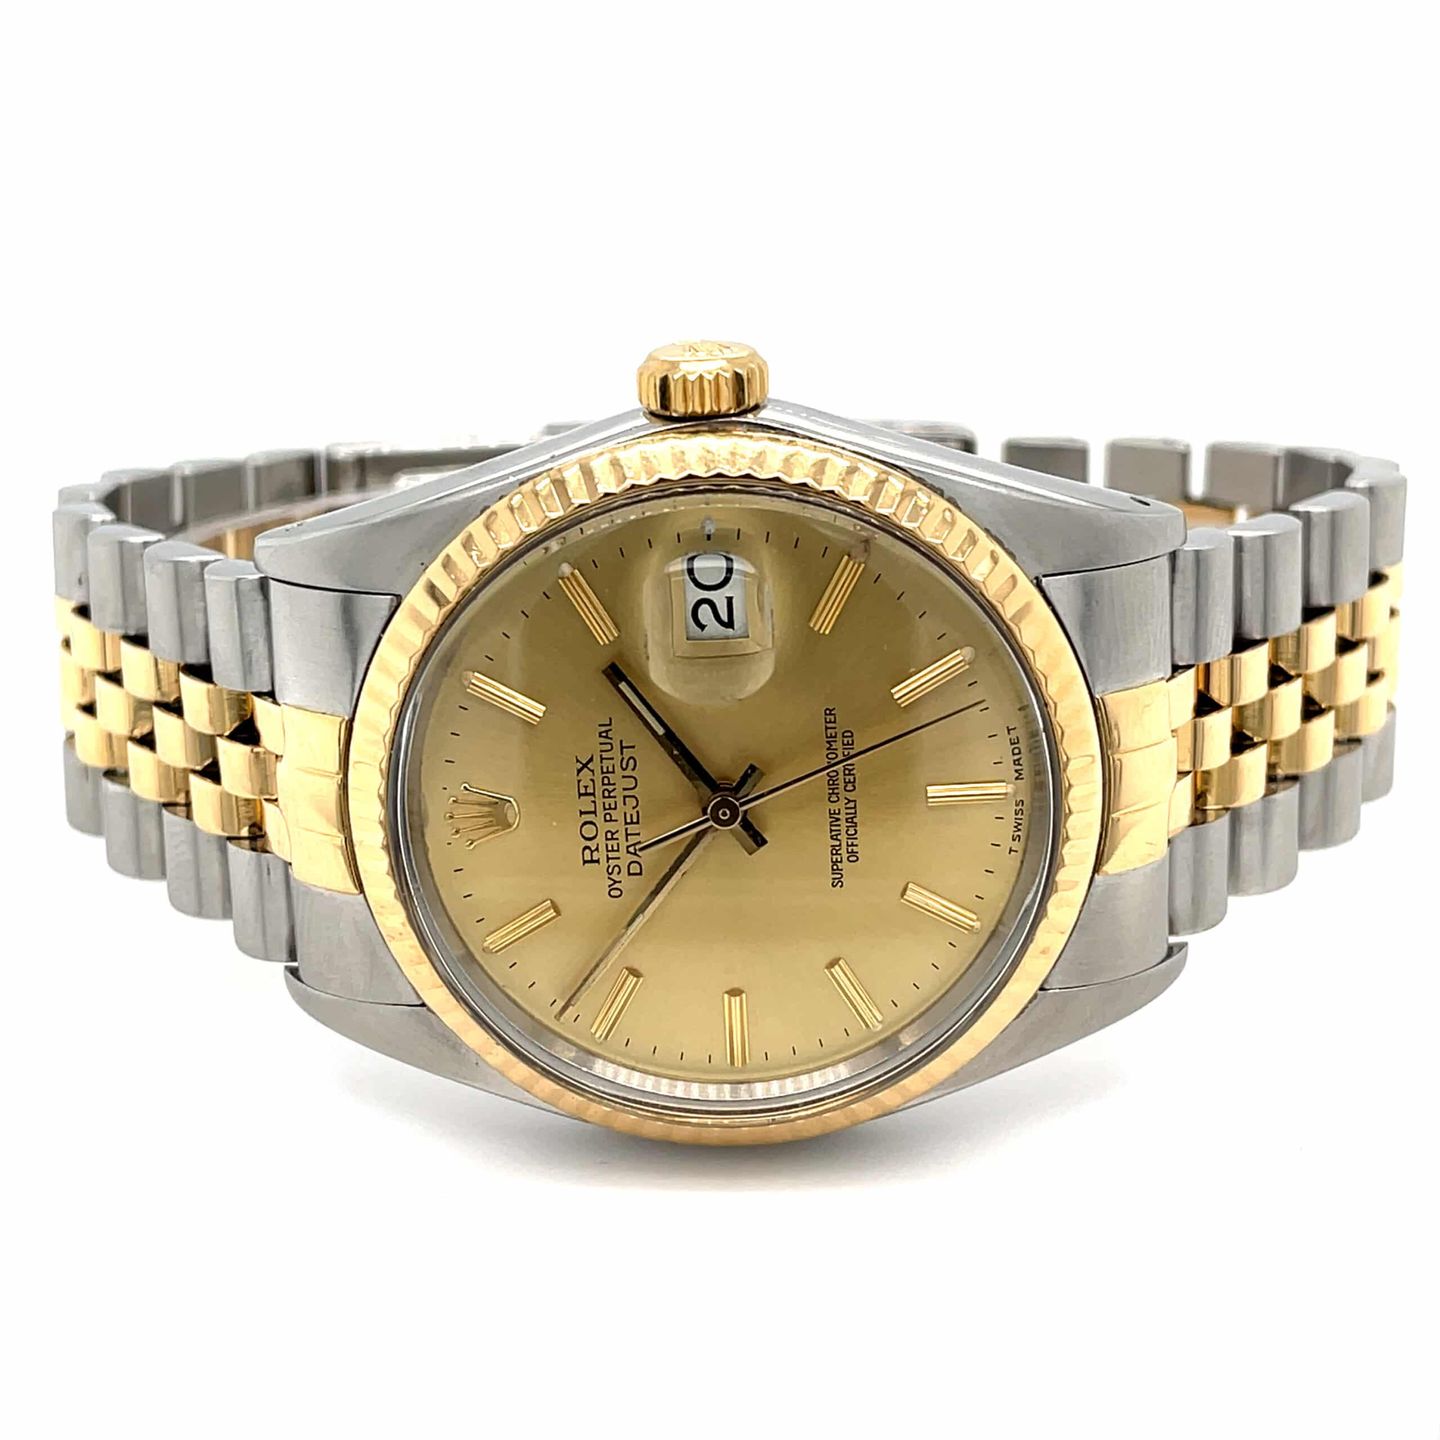 Rolex Datejust 36 16013 (1985) - Champagne dial 36 mm Gold/Steel case (1/8)